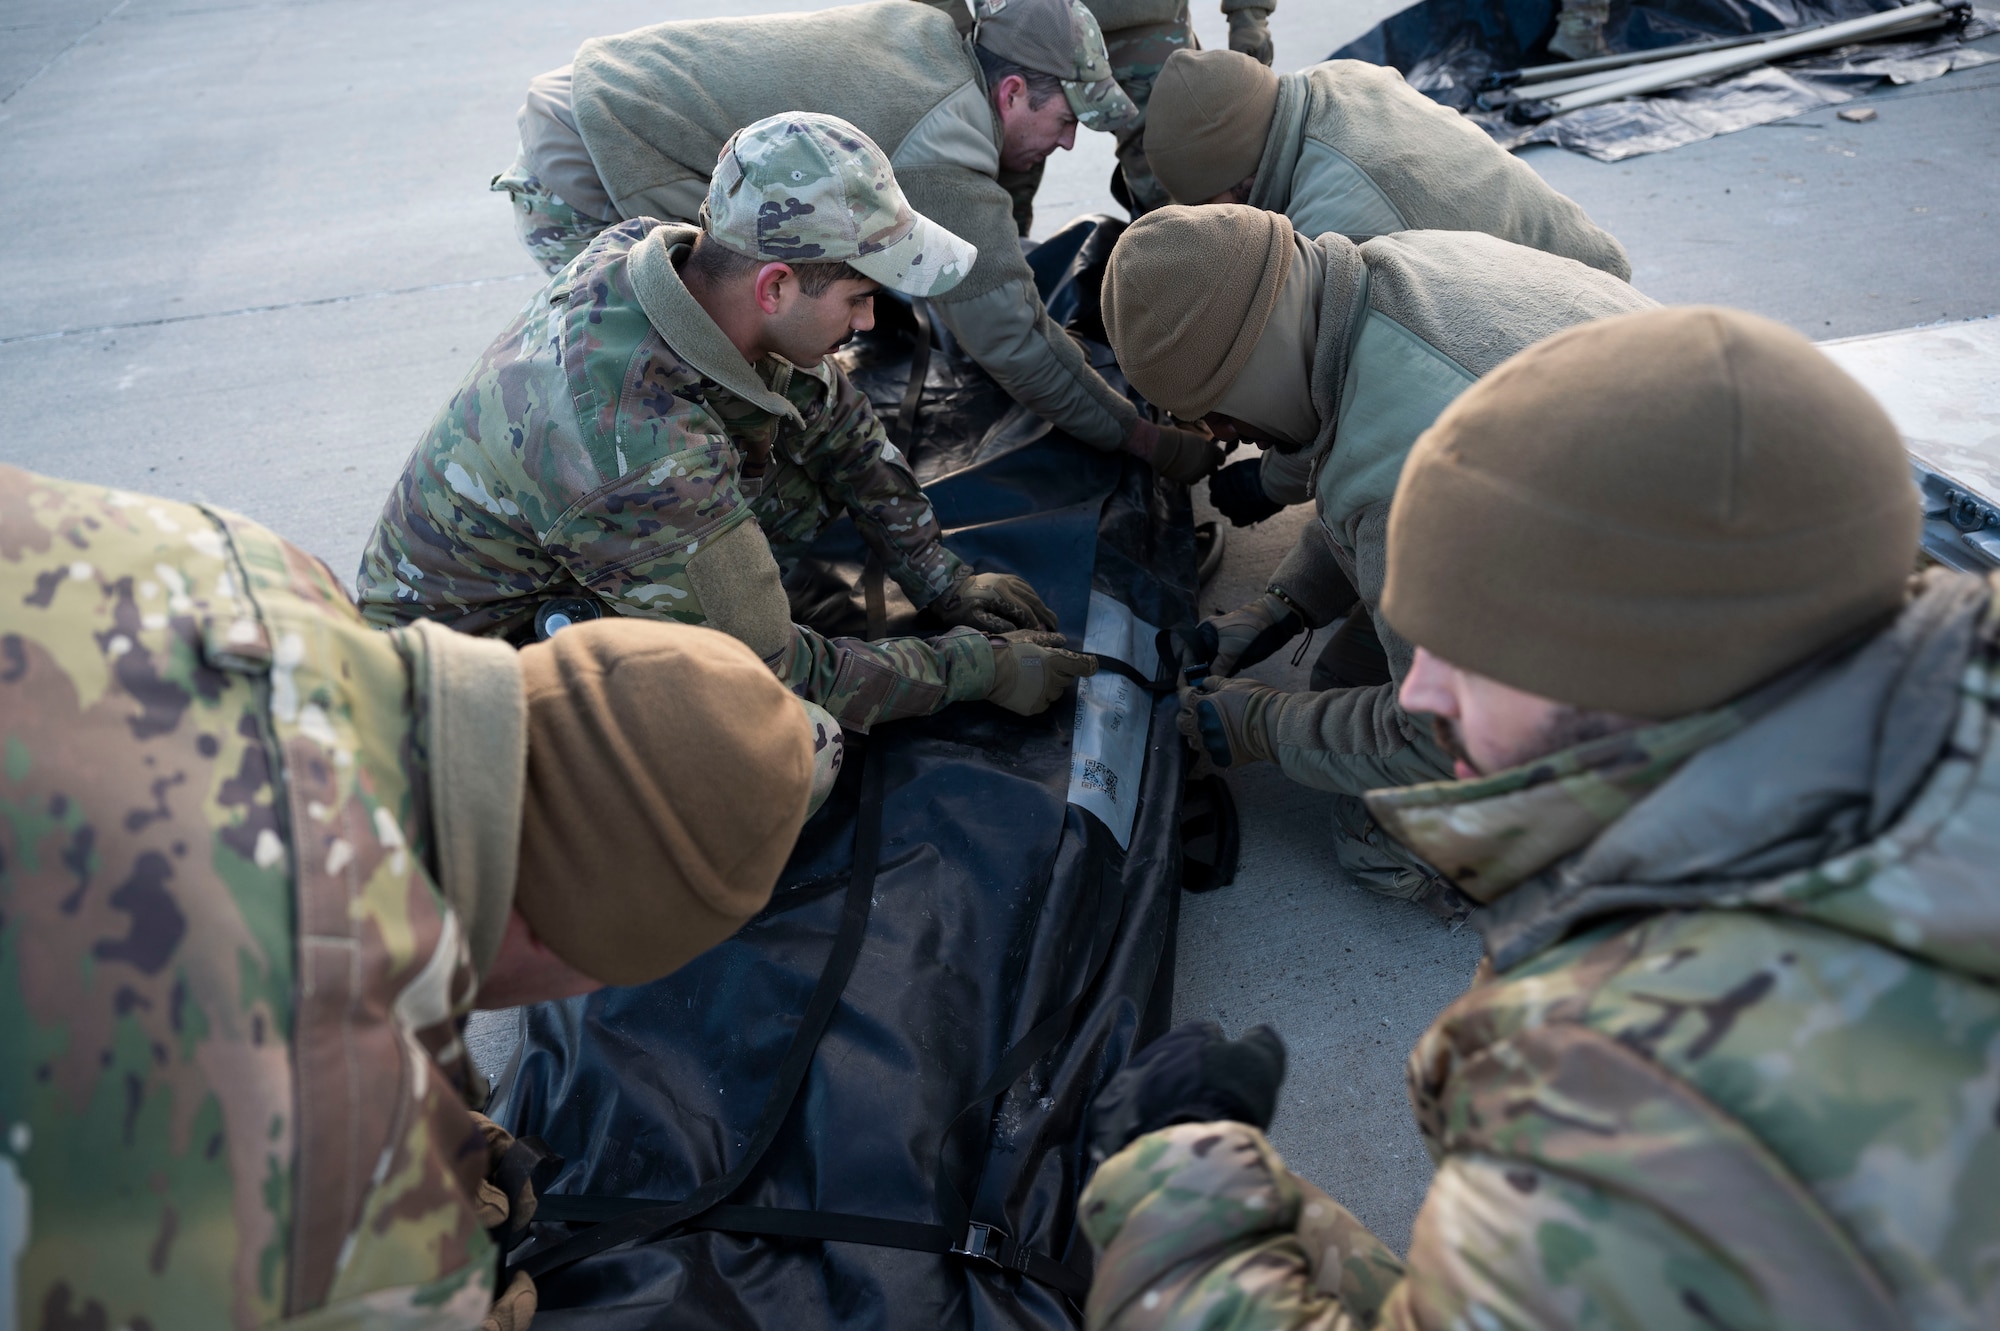 621st CRW members break down tents at the end of Emerald Warrior